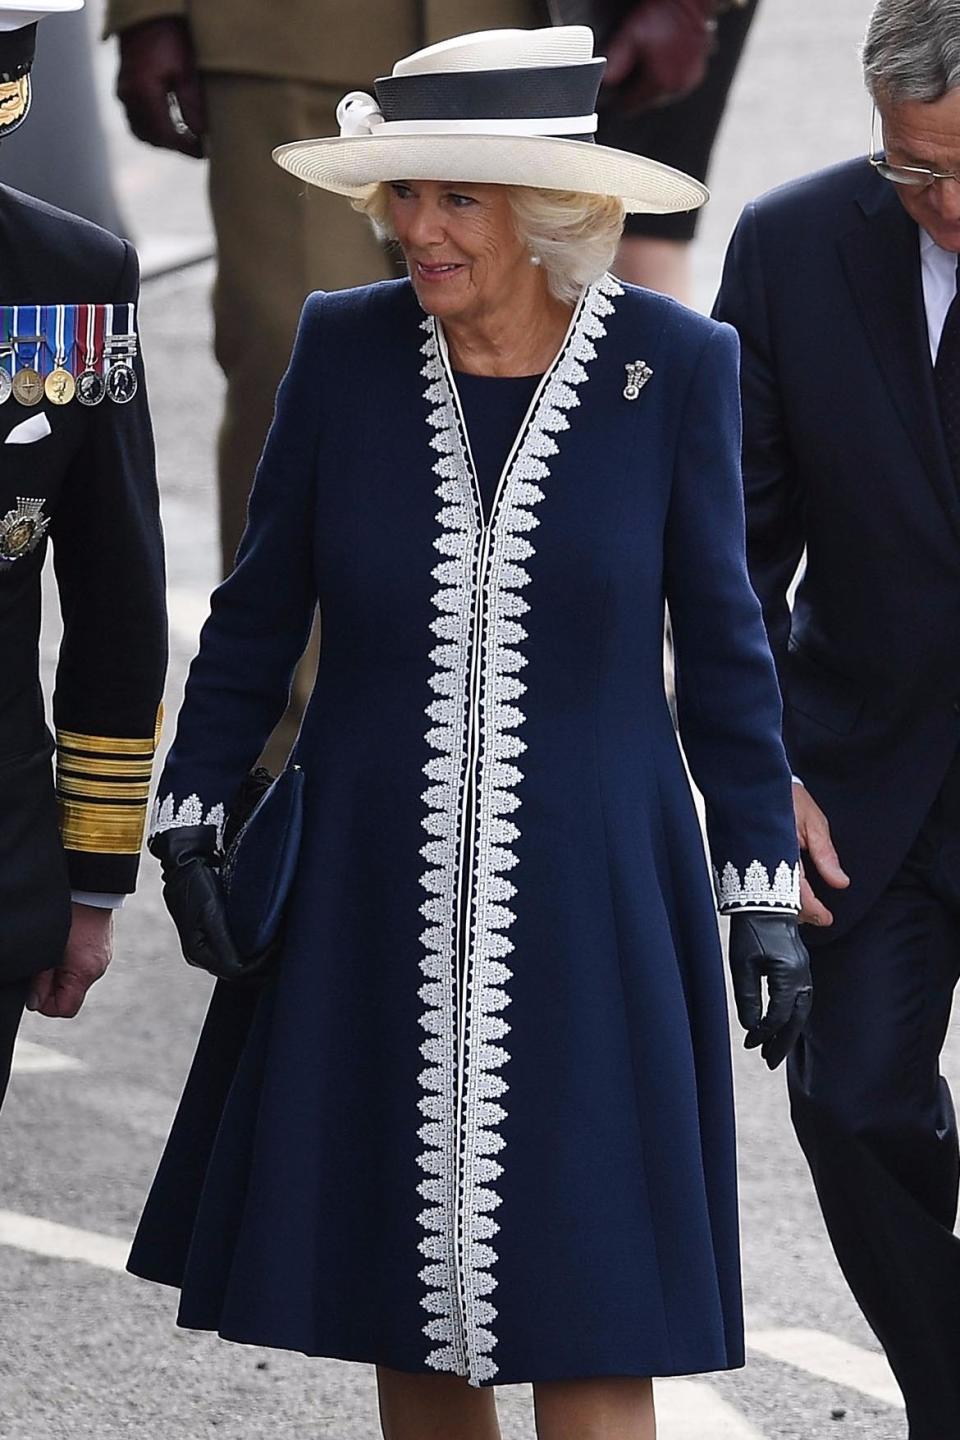 The design and matching hat game resembles this navy and white coat Camilla was seen in earlier this month.